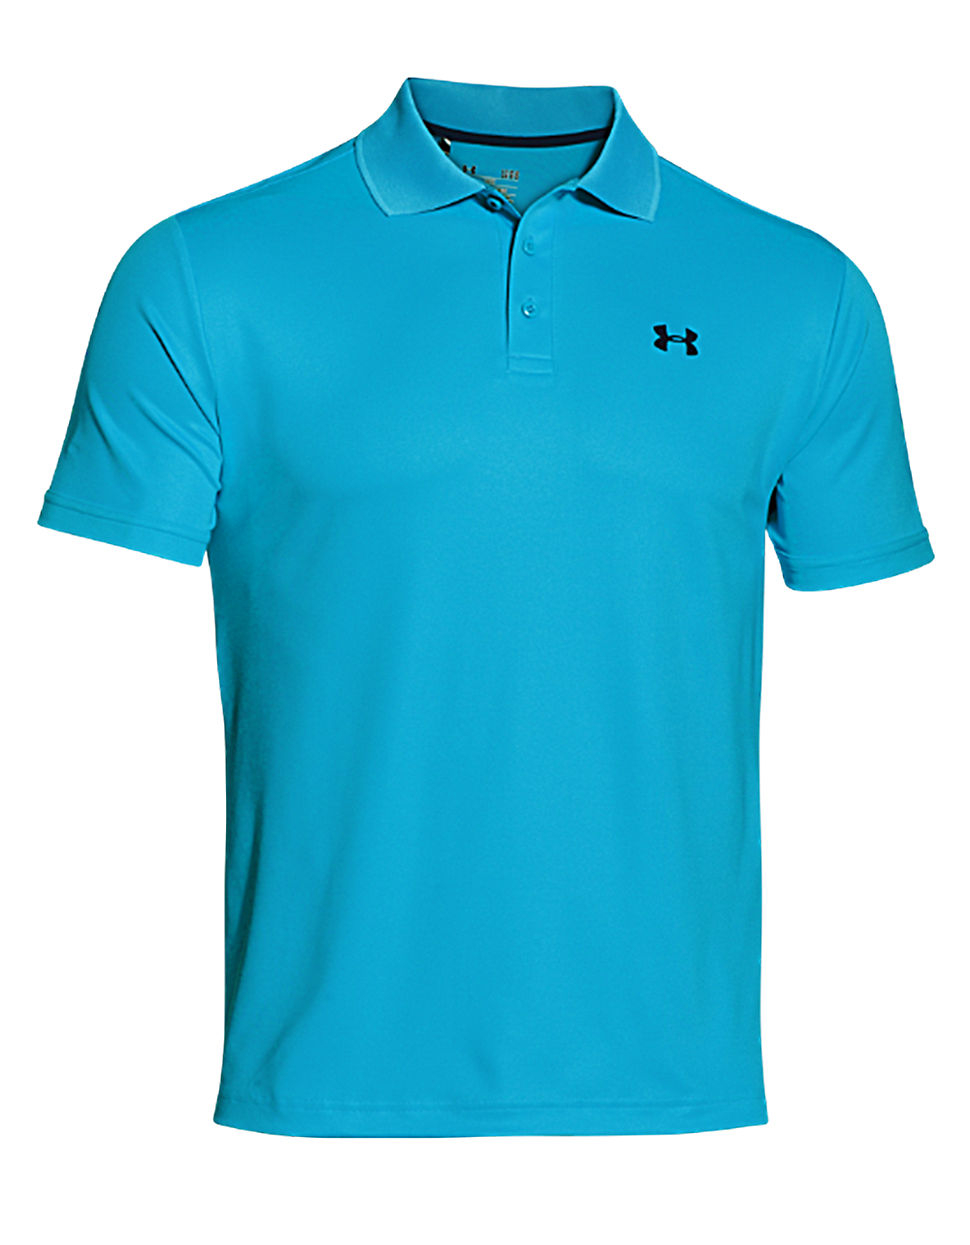 Lyst - Under Armour Performance Polo in Blue for Men